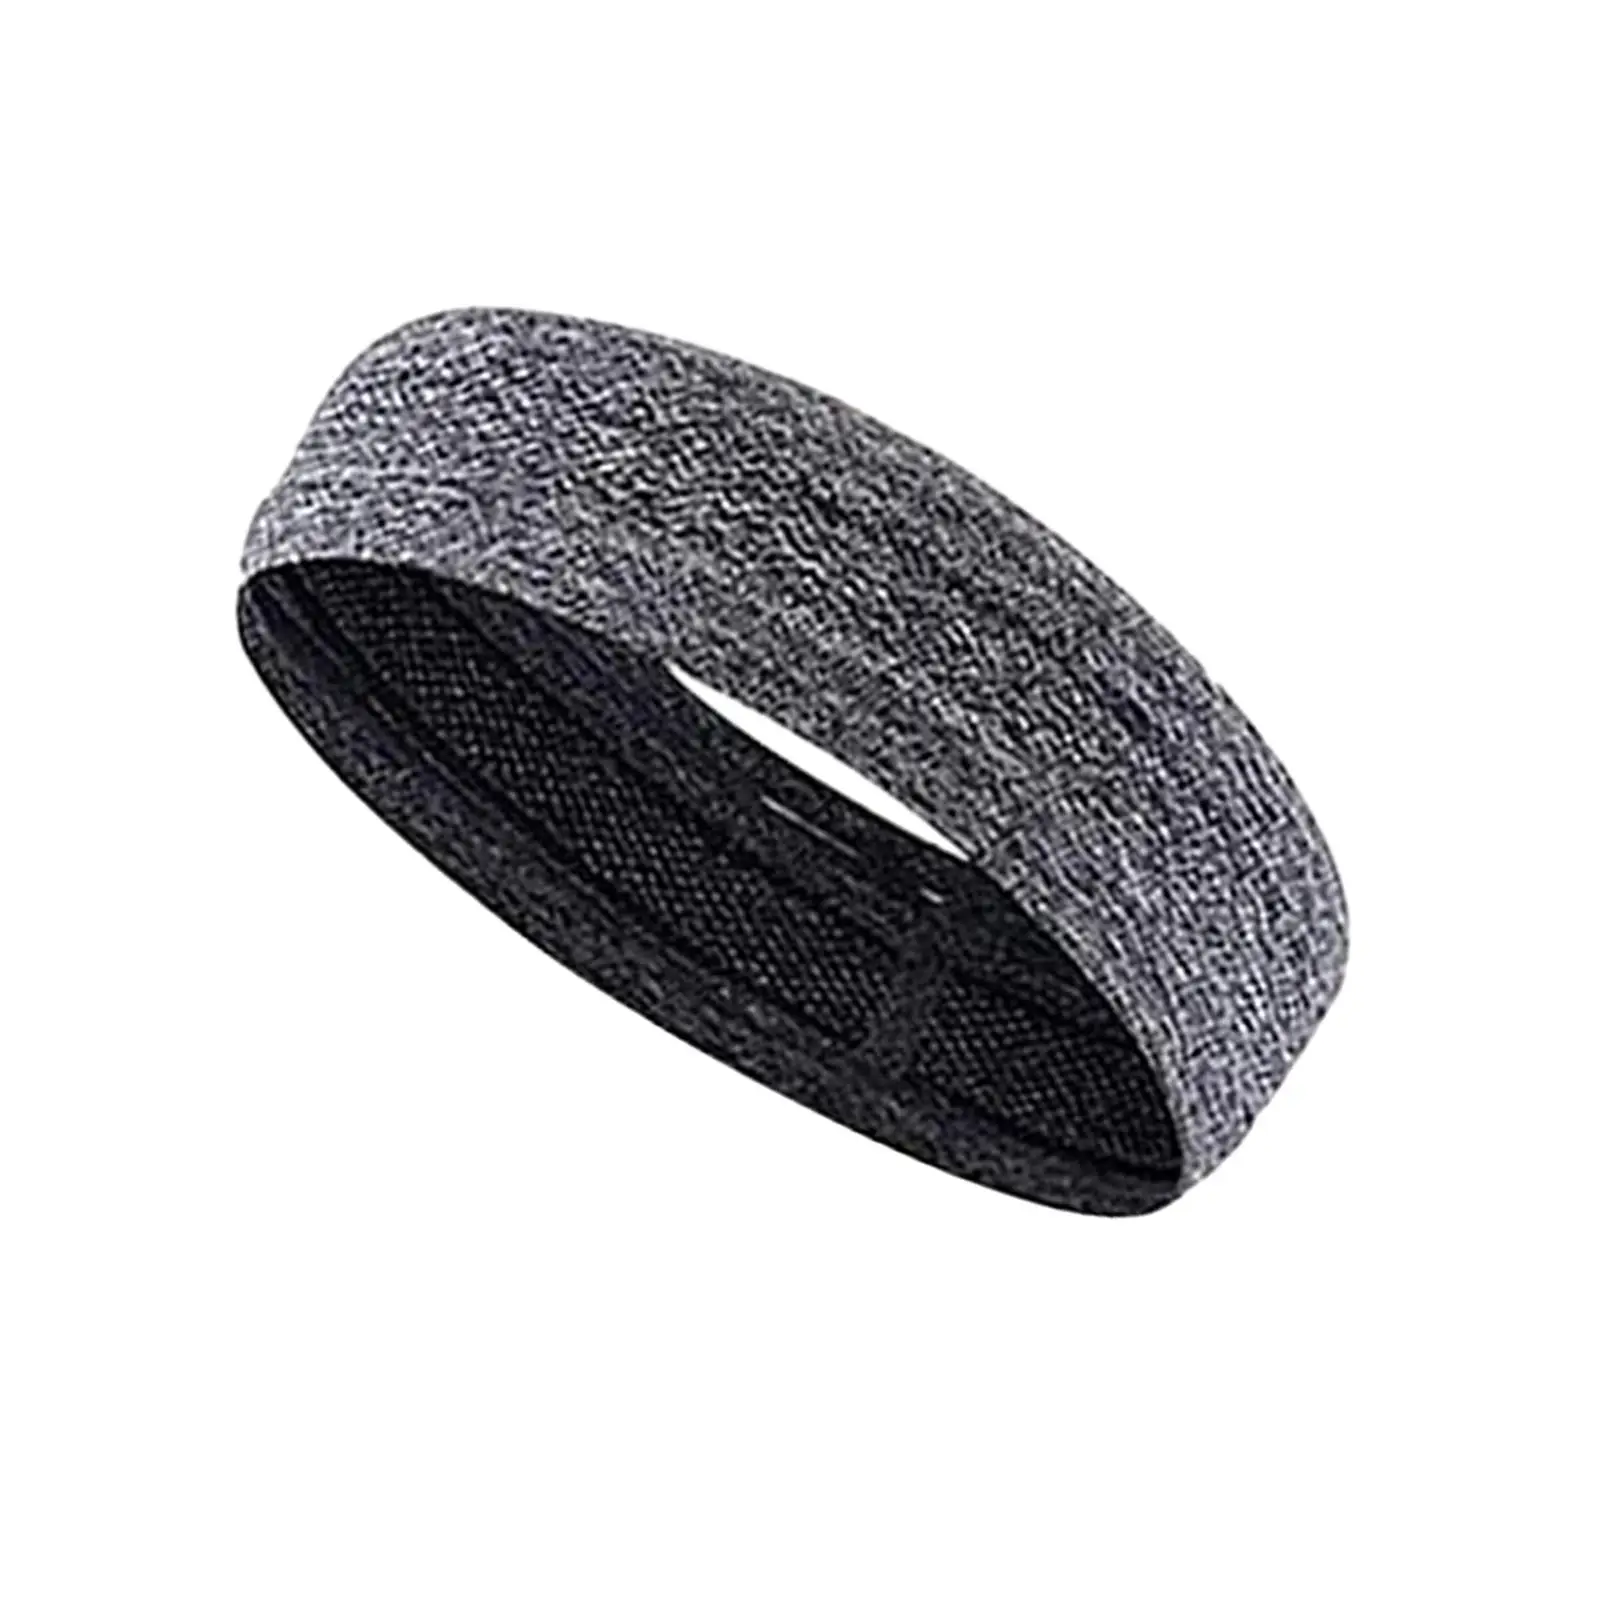 Sweatband Elastic Sports Headbands for Working Out Soccer Cross Training